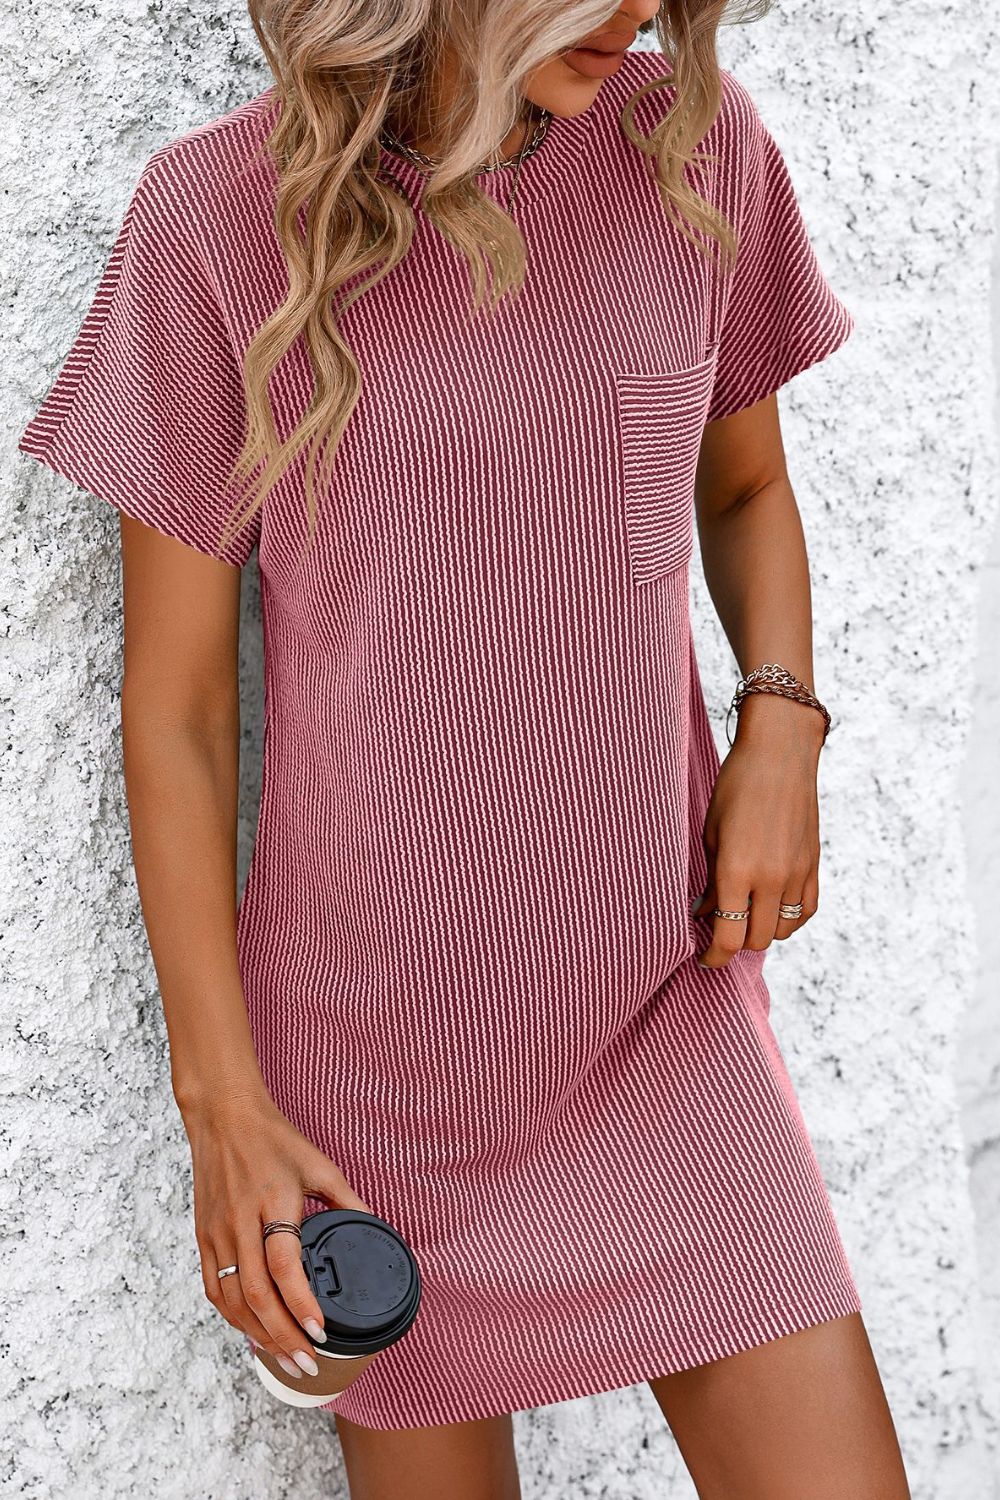 Chic Ribbed Striped Mini Tee Dress - a perfect blend of style, comfort, and versatility. Available in 5 colors to elevate your everyday look!